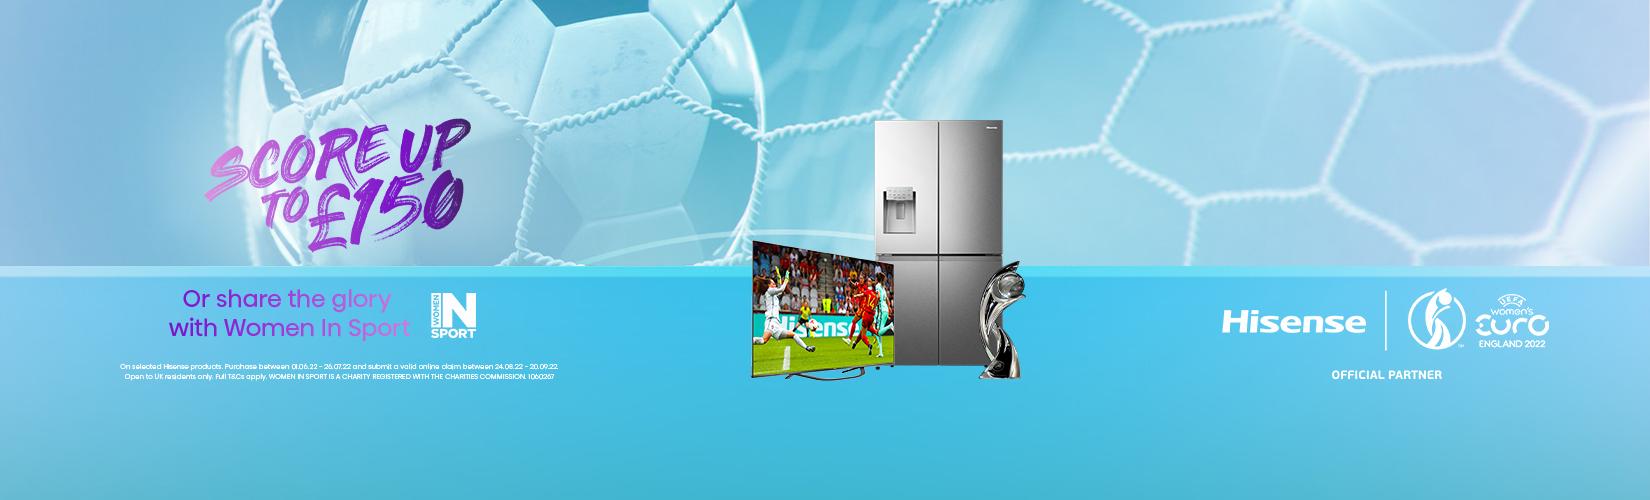 Hisense. Score up to £150 or share the glory with women in sport.